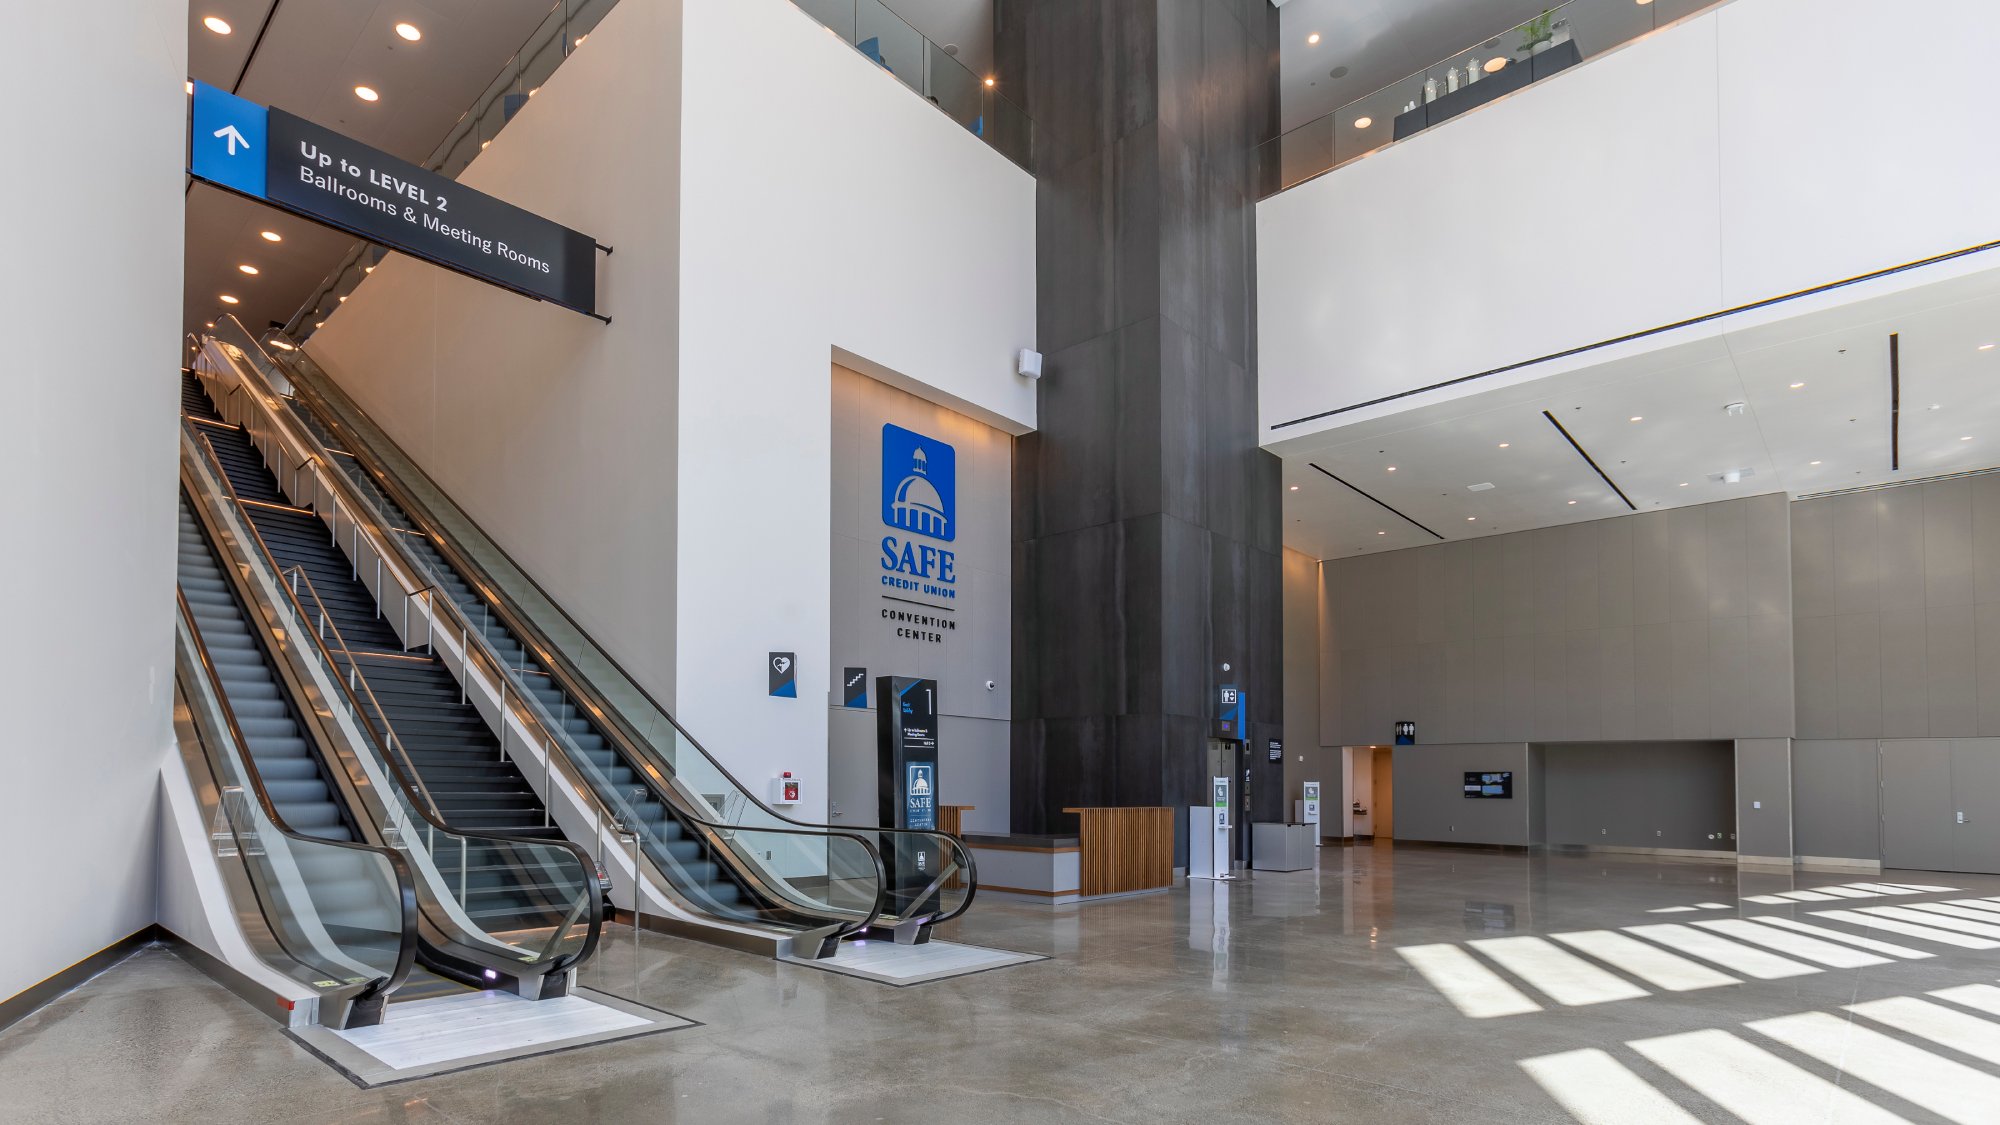 East Lobby with escalator and elevators